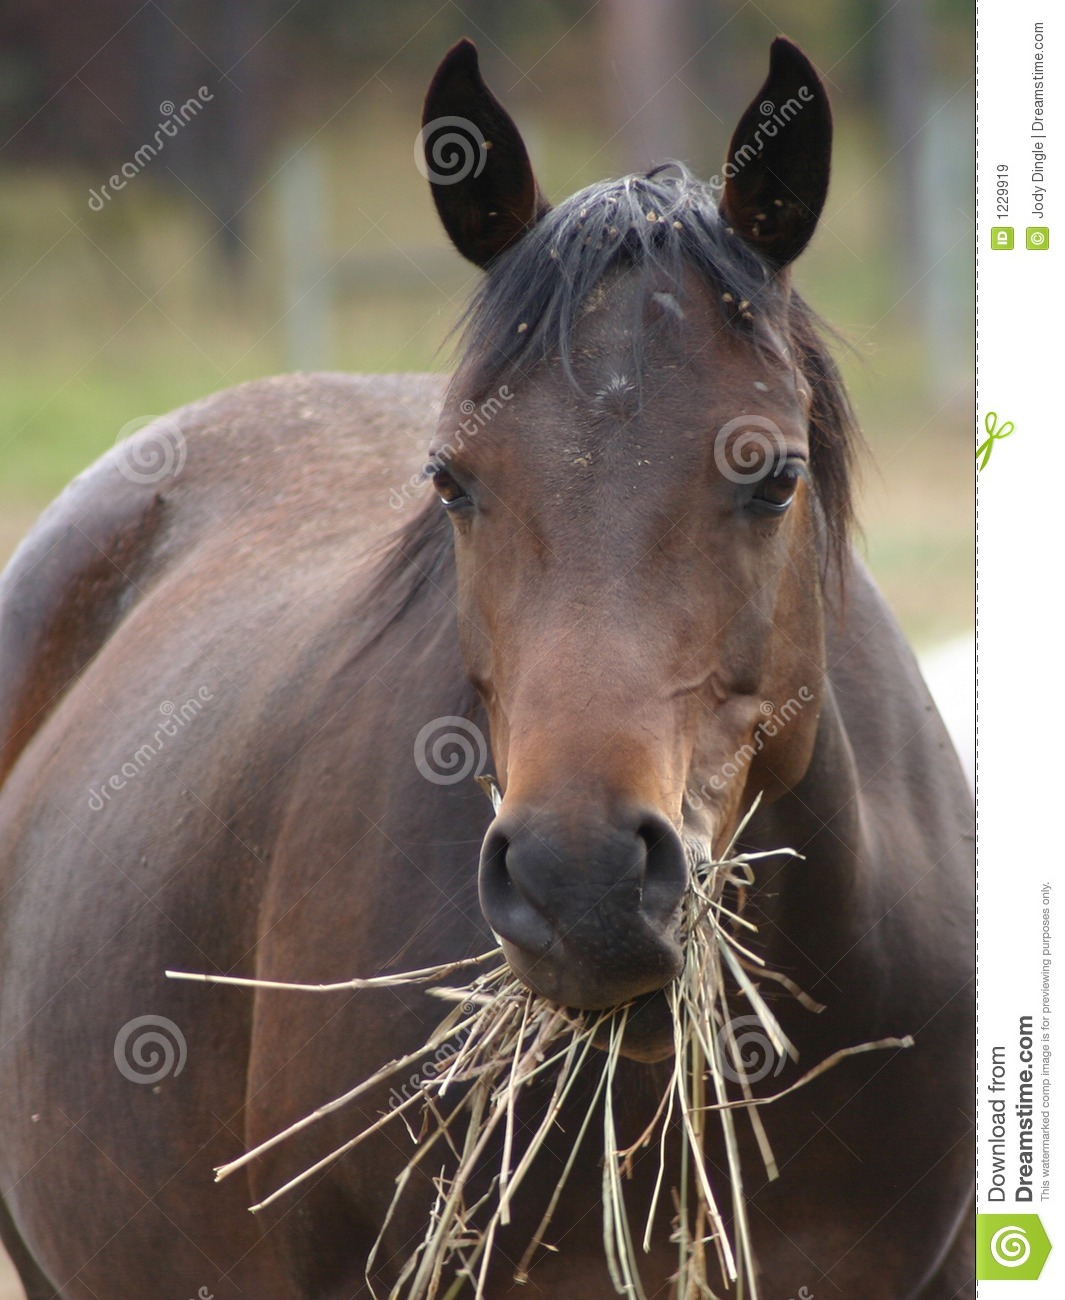 Royalty Free Stock Images  Horse Eating Hay